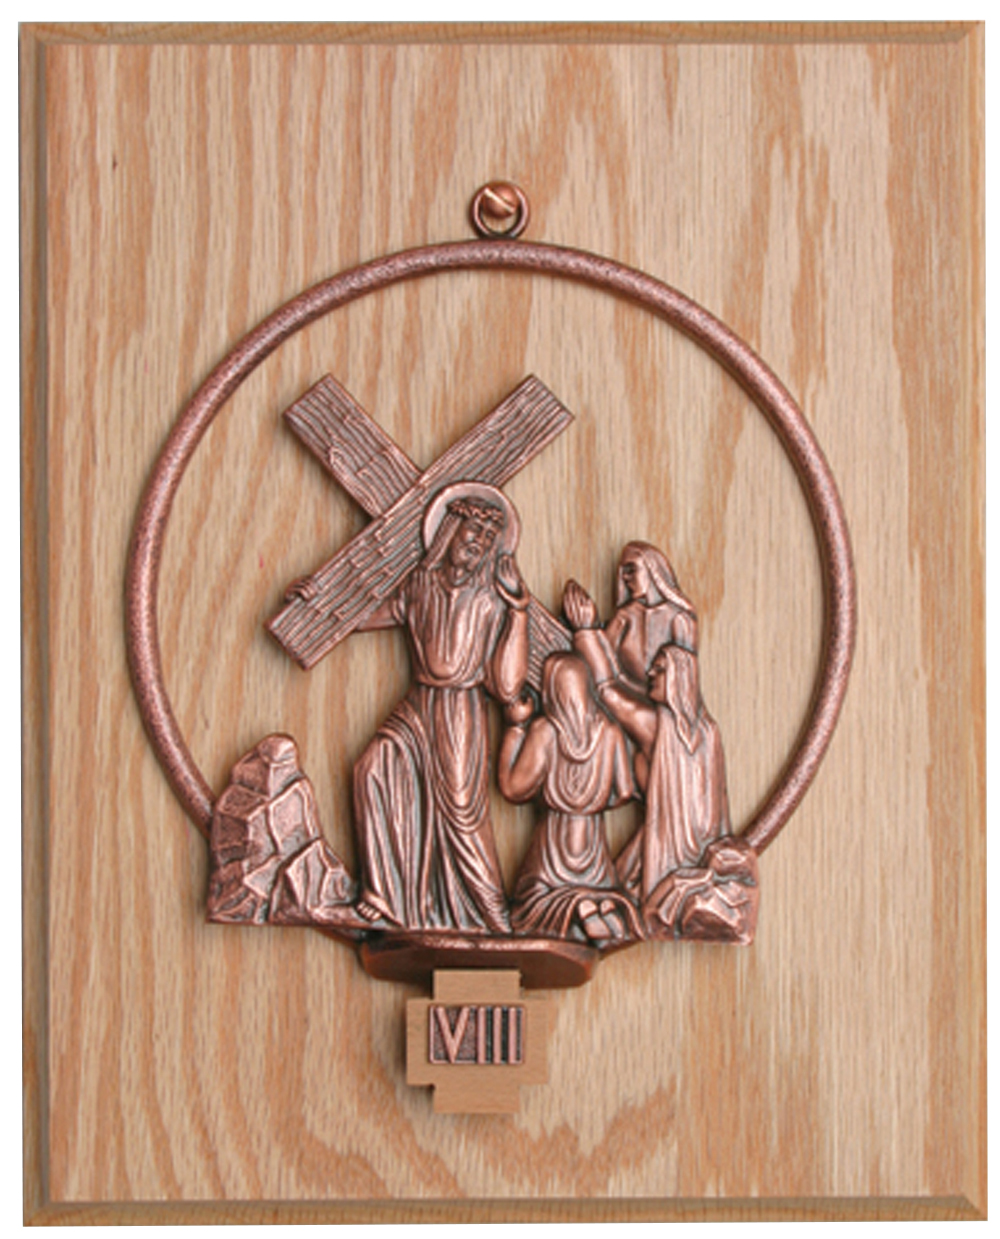 Stations of the Cross Bronze 7 x 6 in